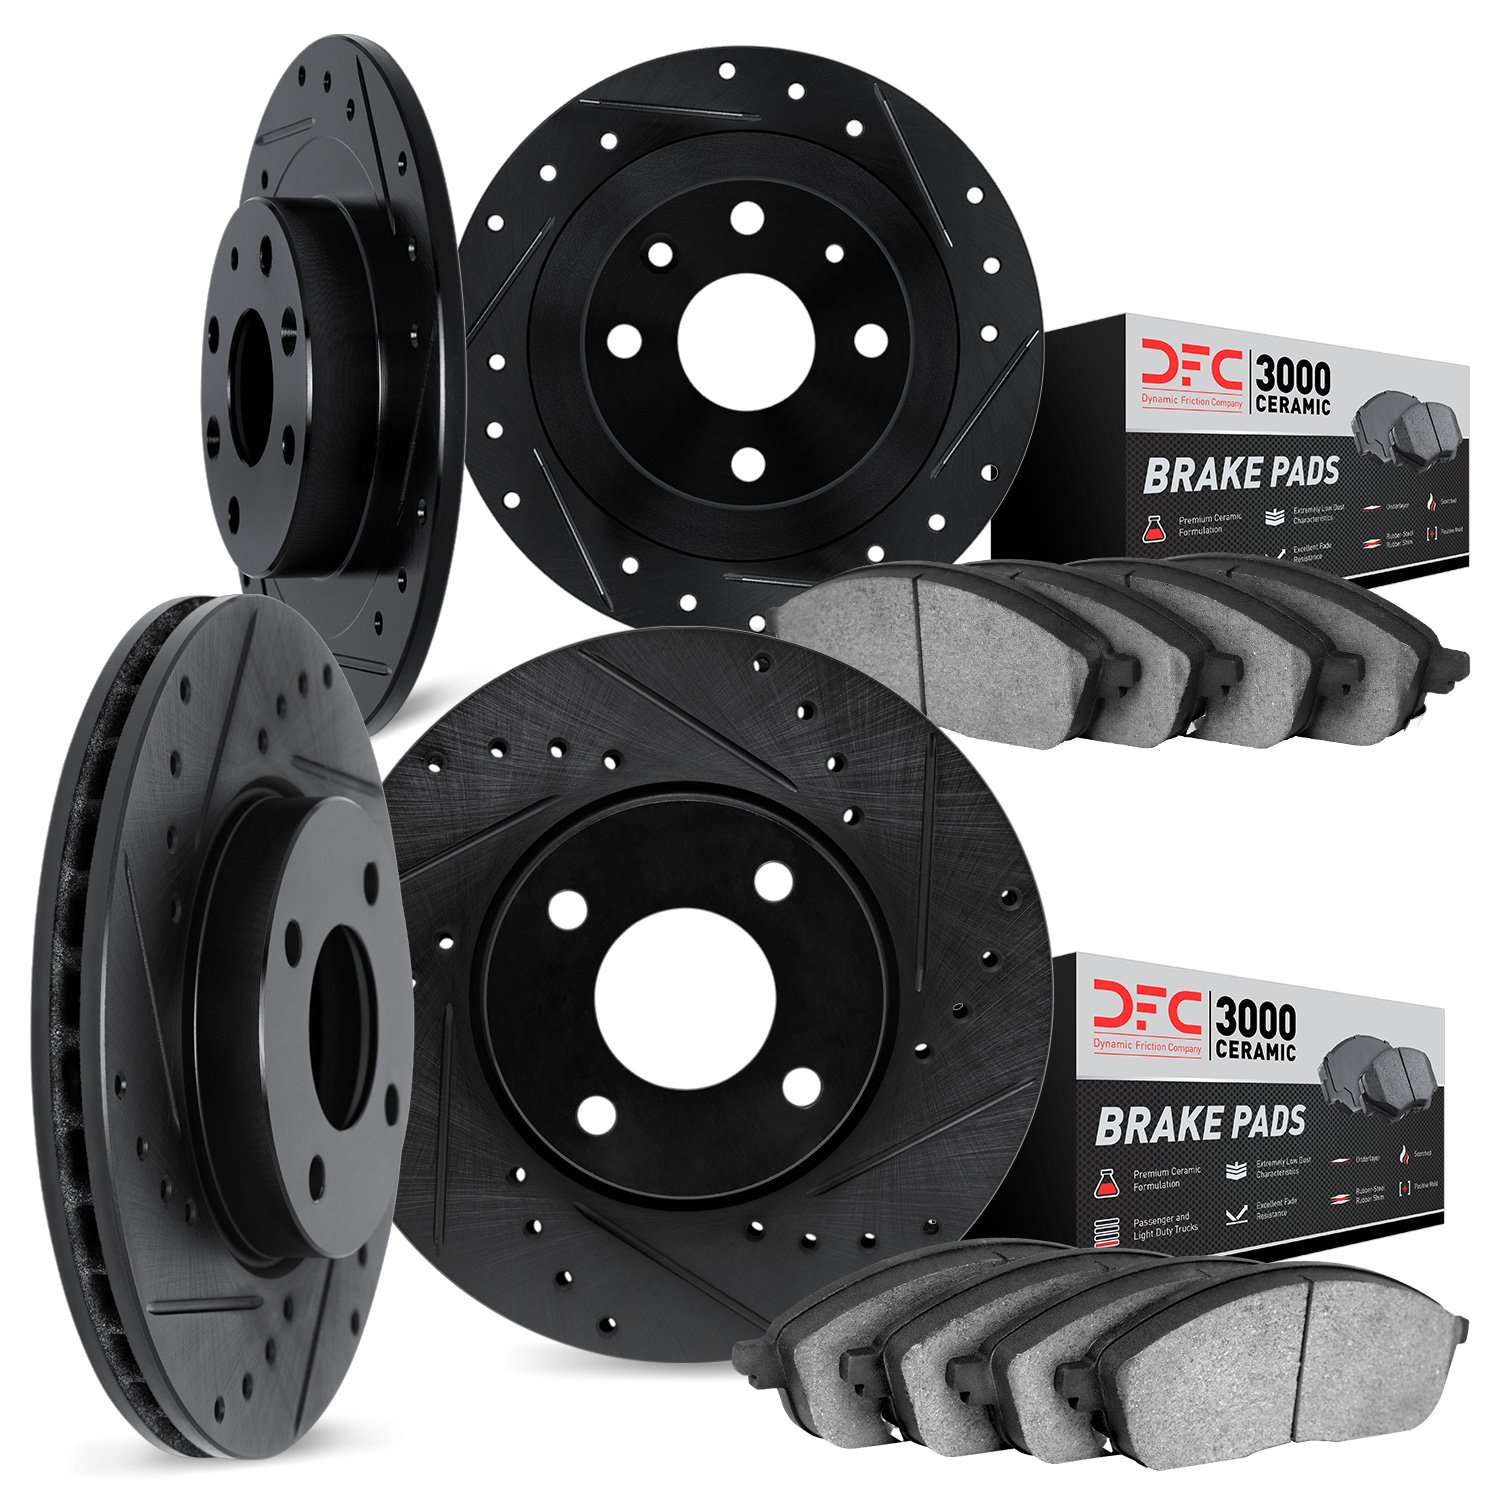 8304-58007 Drilled/Slotted Brake Rotors with 3000-Series Ceramic Brake Pads Kit [Black], 1995-1998 Acura/Honda, Position: Front